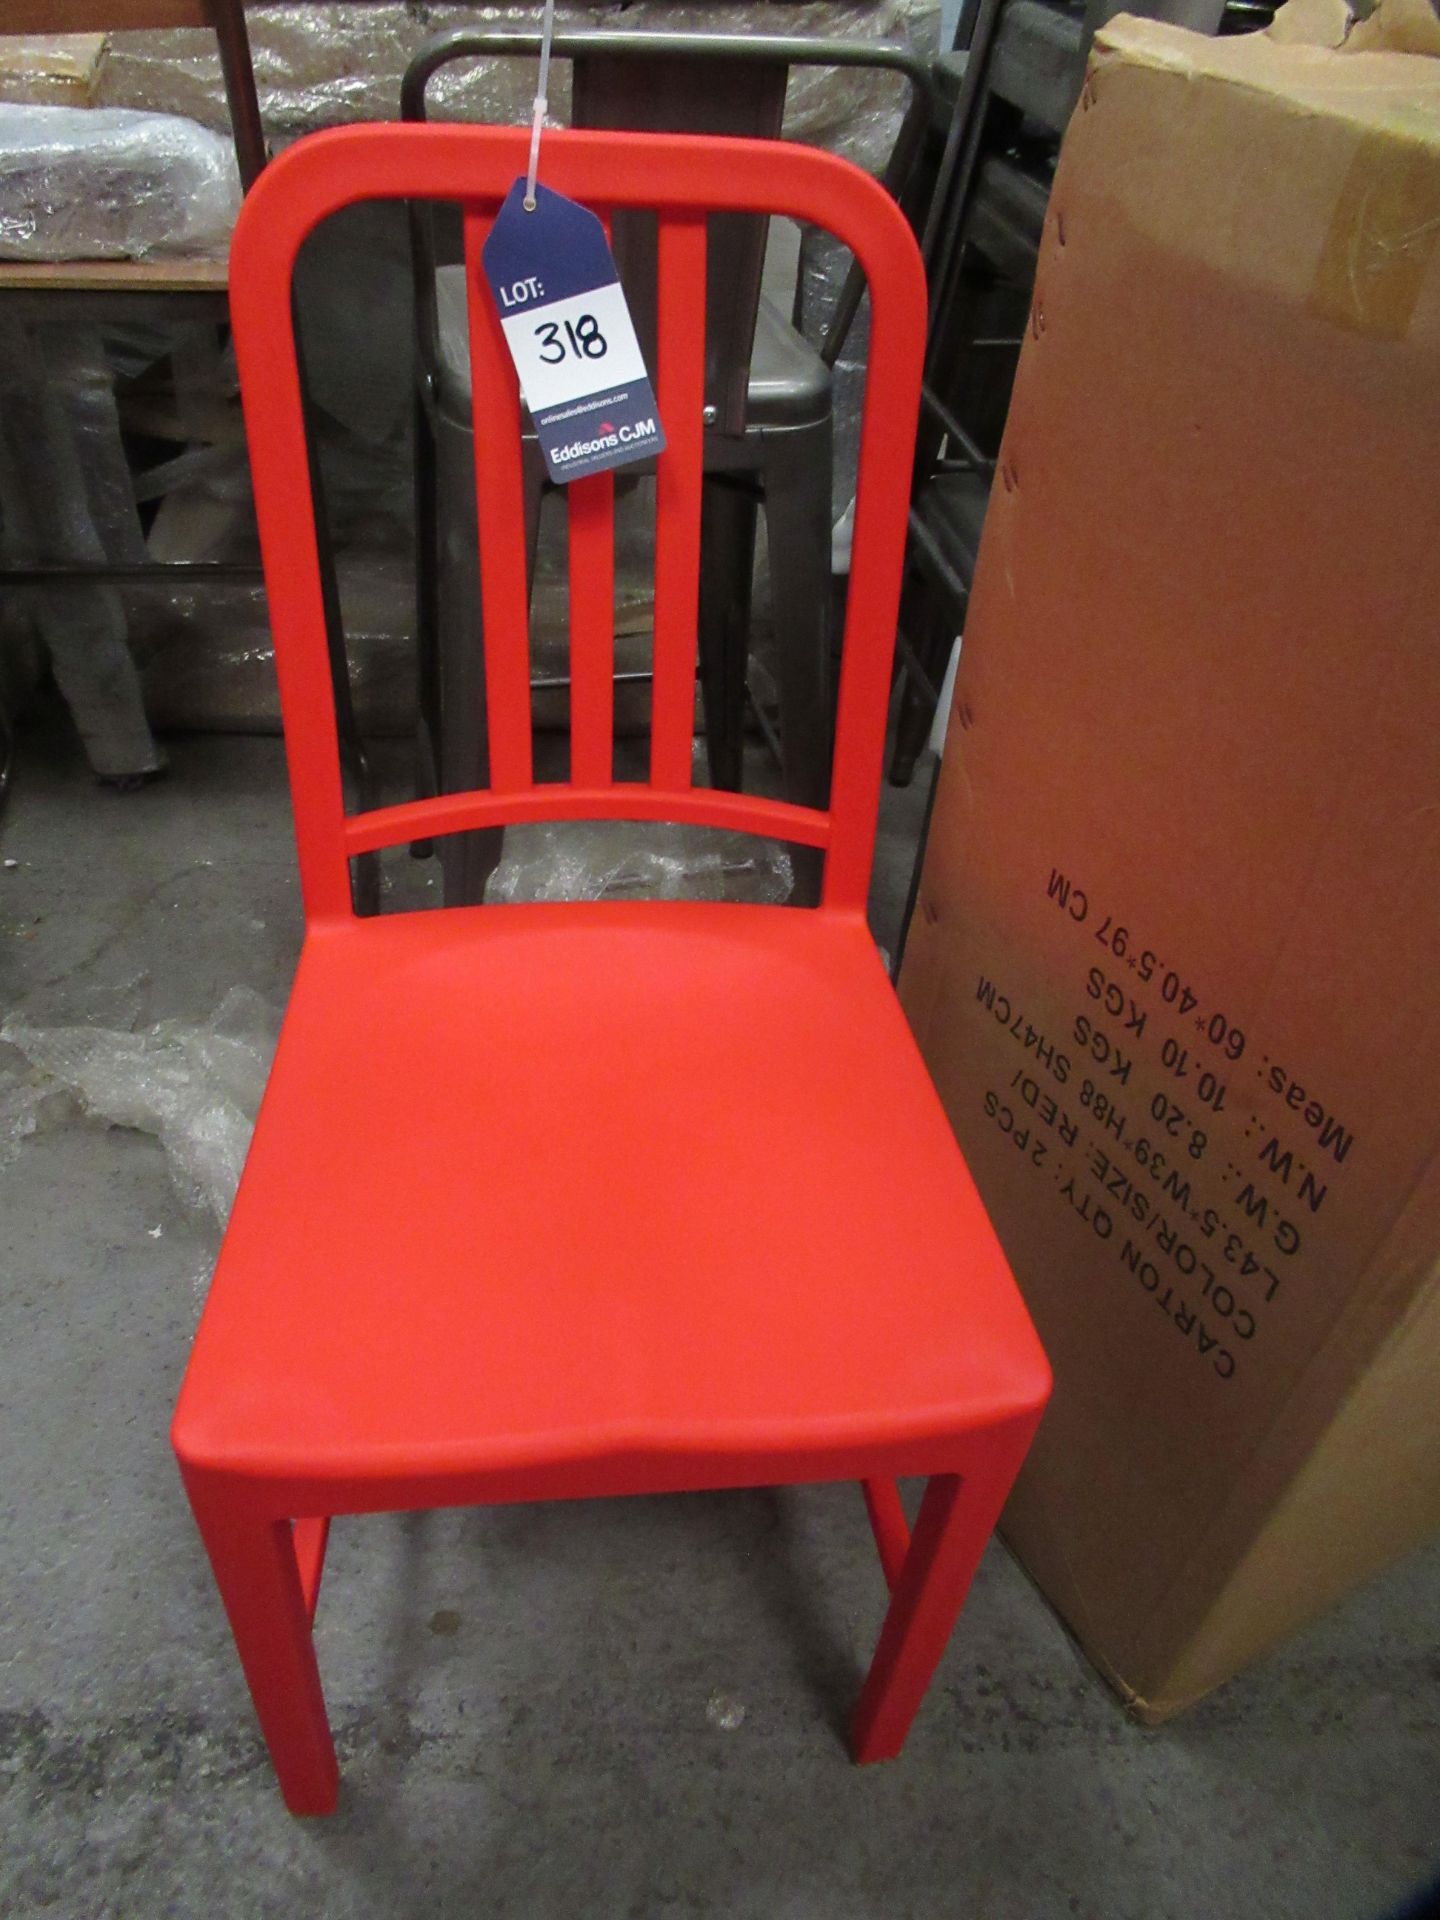 6 x PP Navy Chairs in red